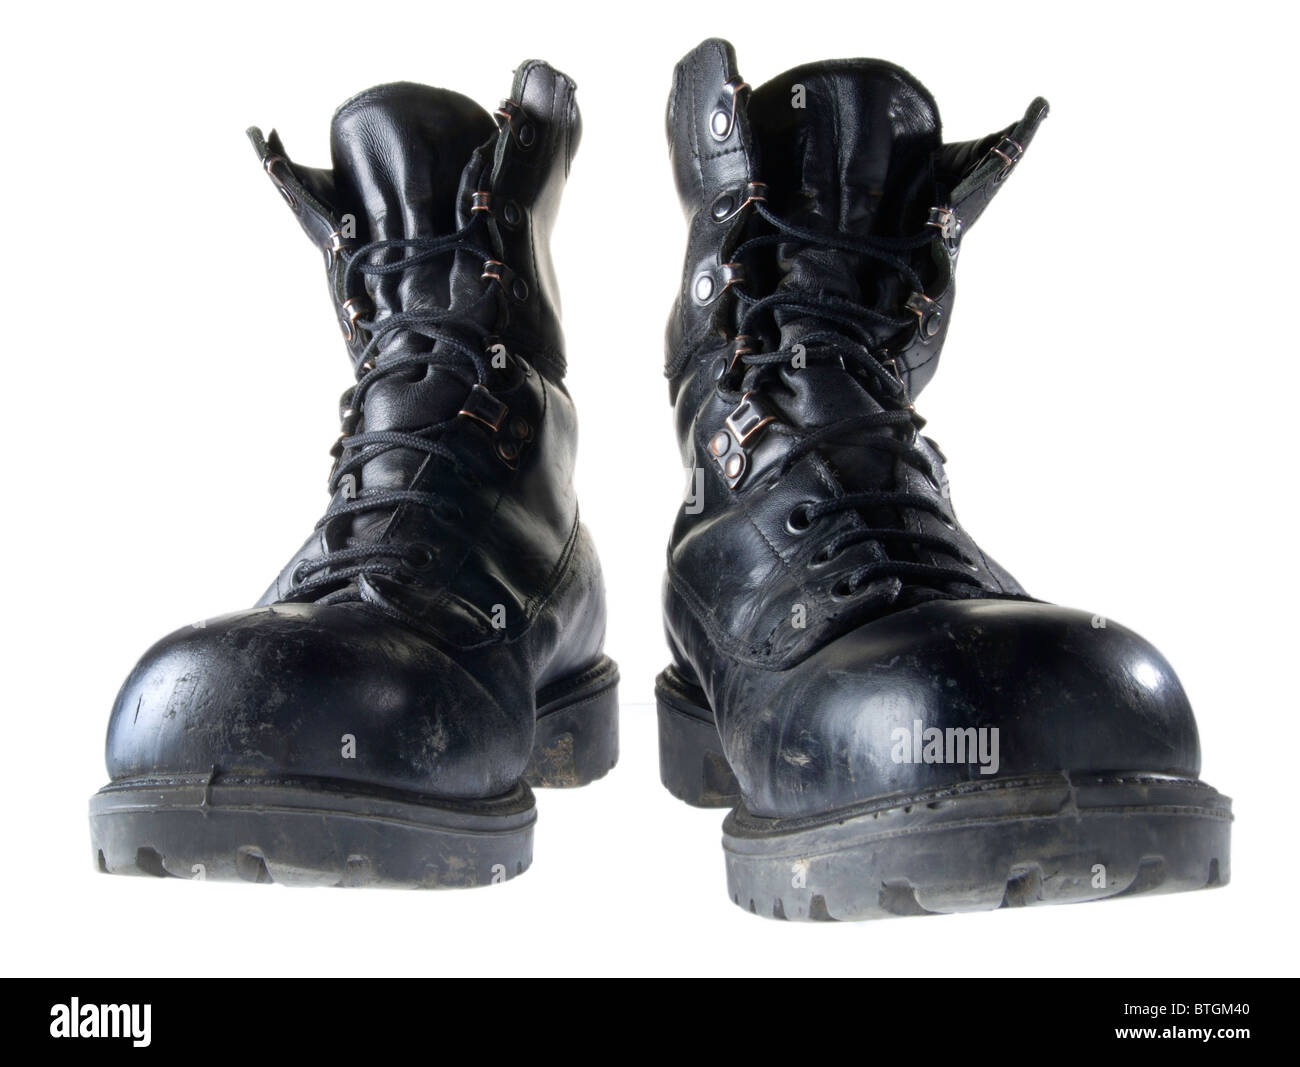 British Army Boots High Resolution Stock Photography And Images Alamy